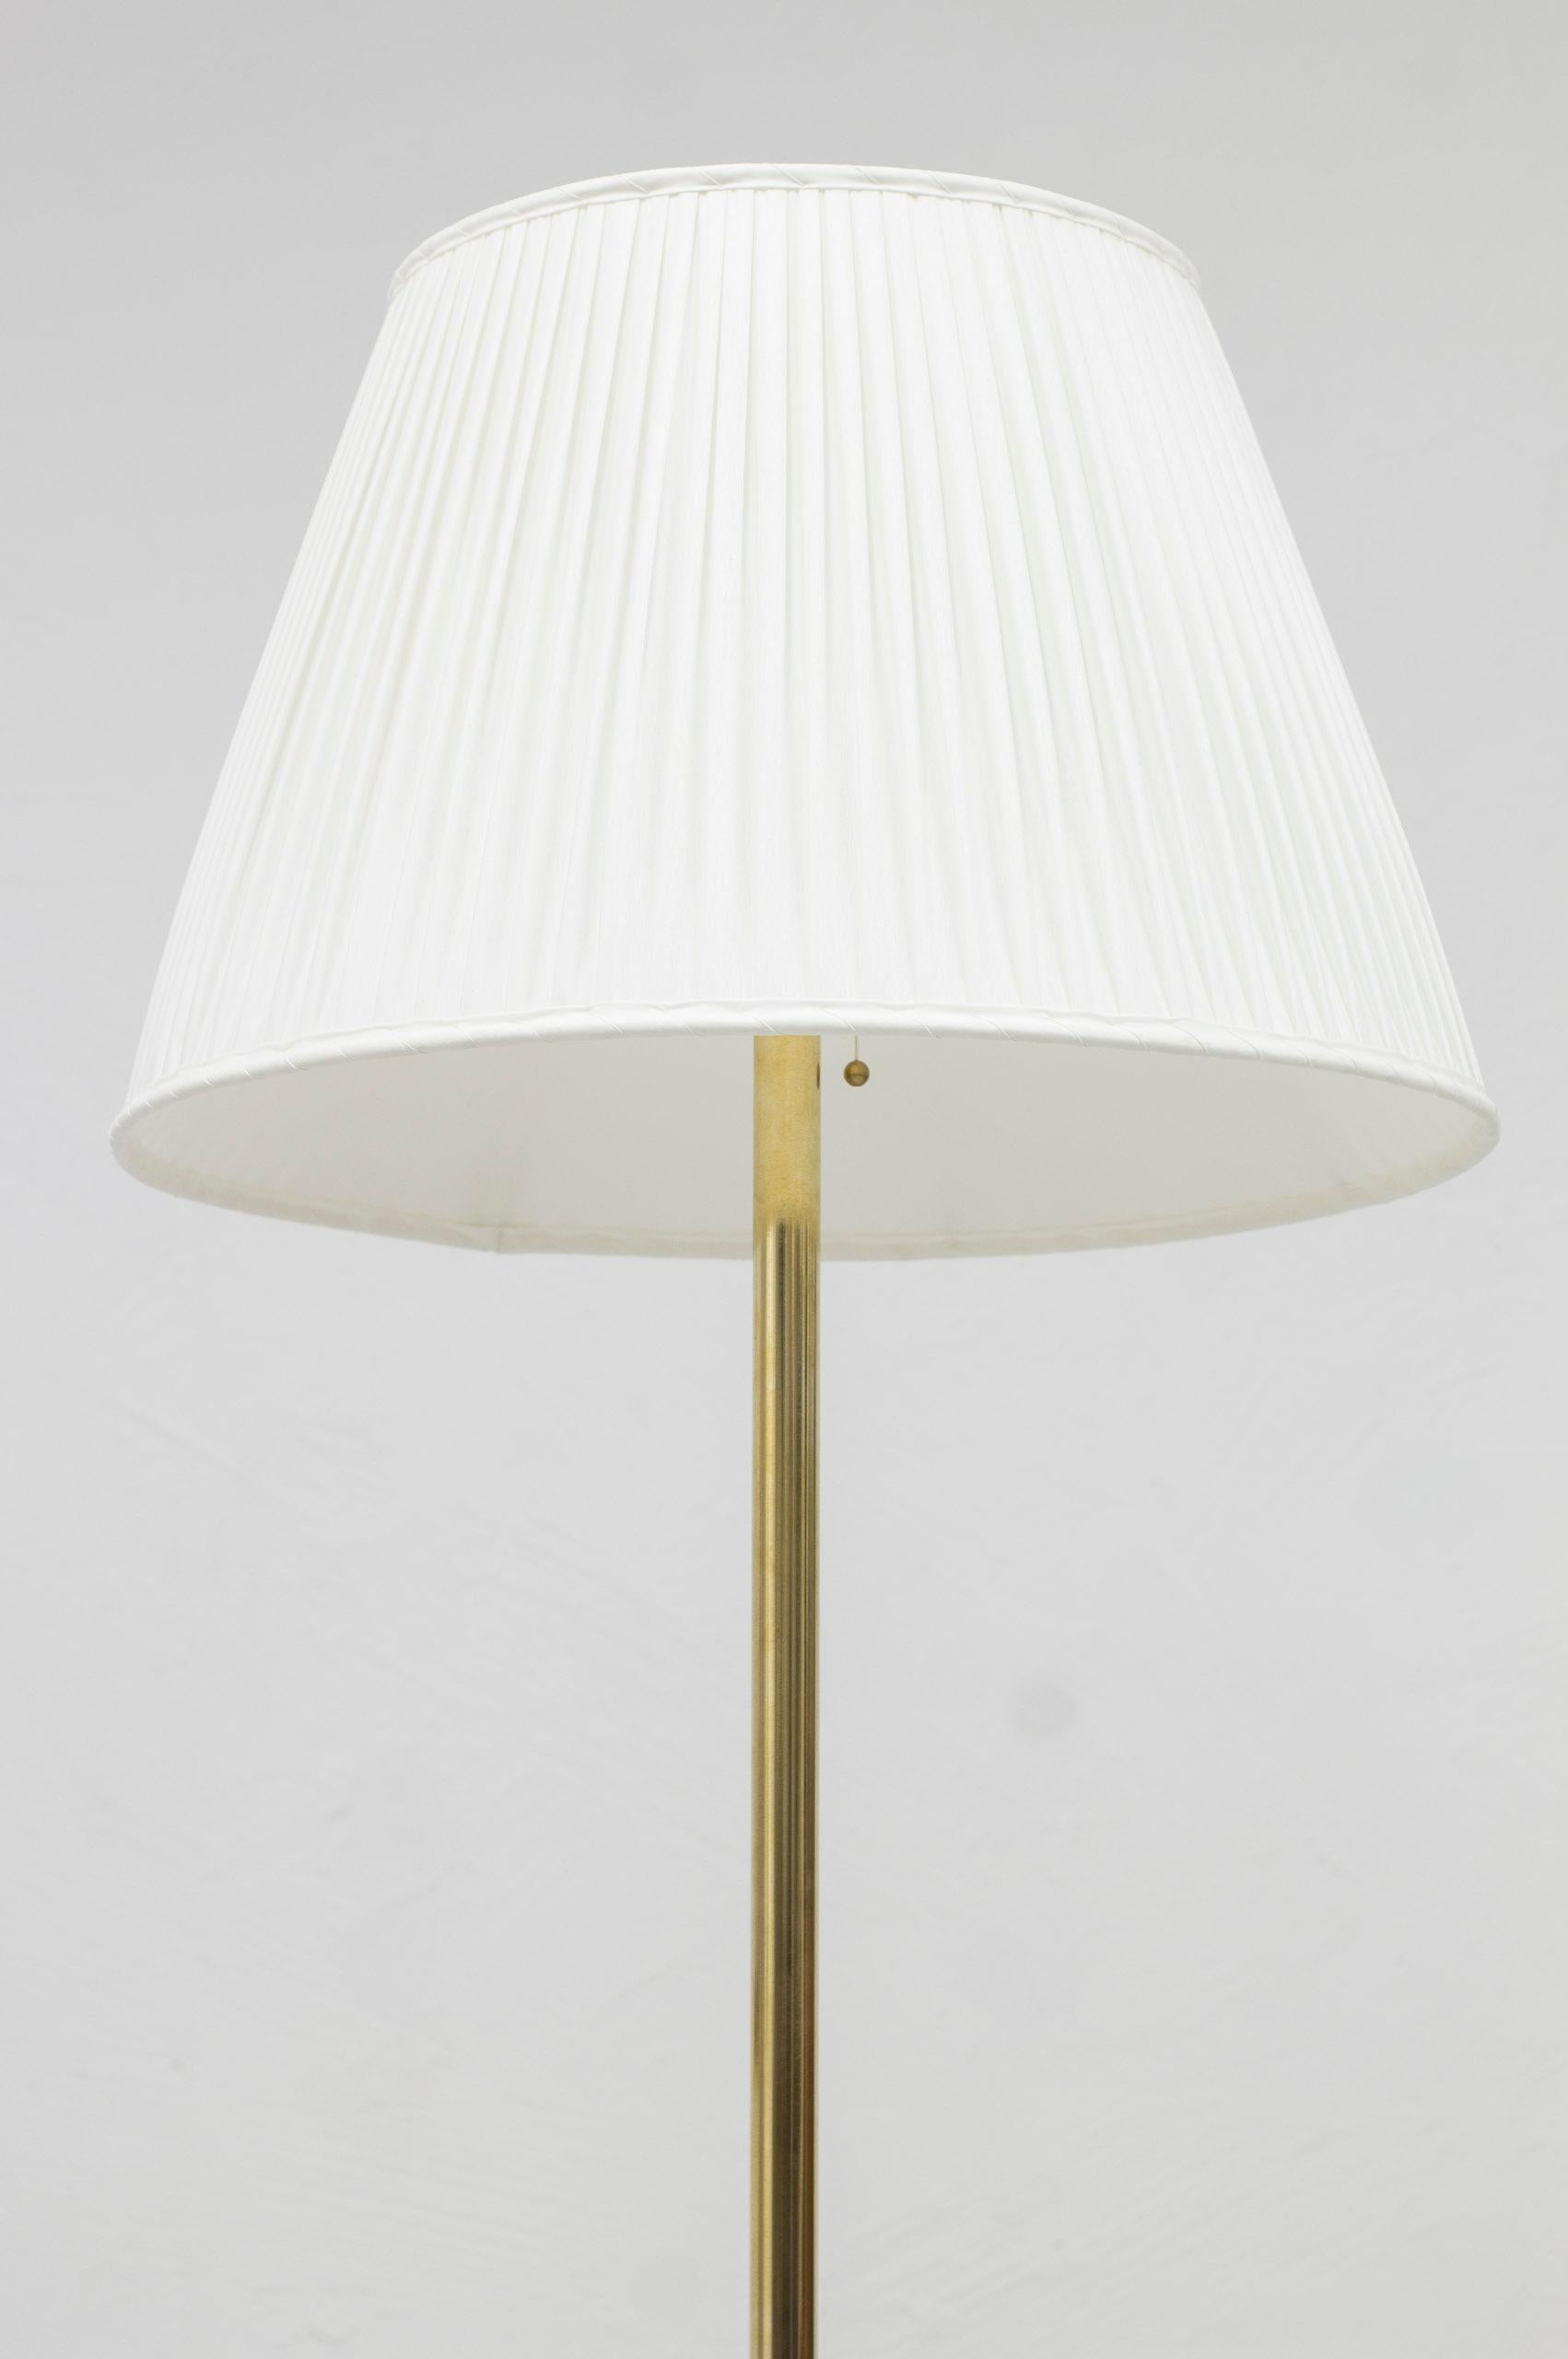 Brass and Glass Floor Lamp 15193 by Harald Notini, Böhlmarks, Sweden For Sale 1